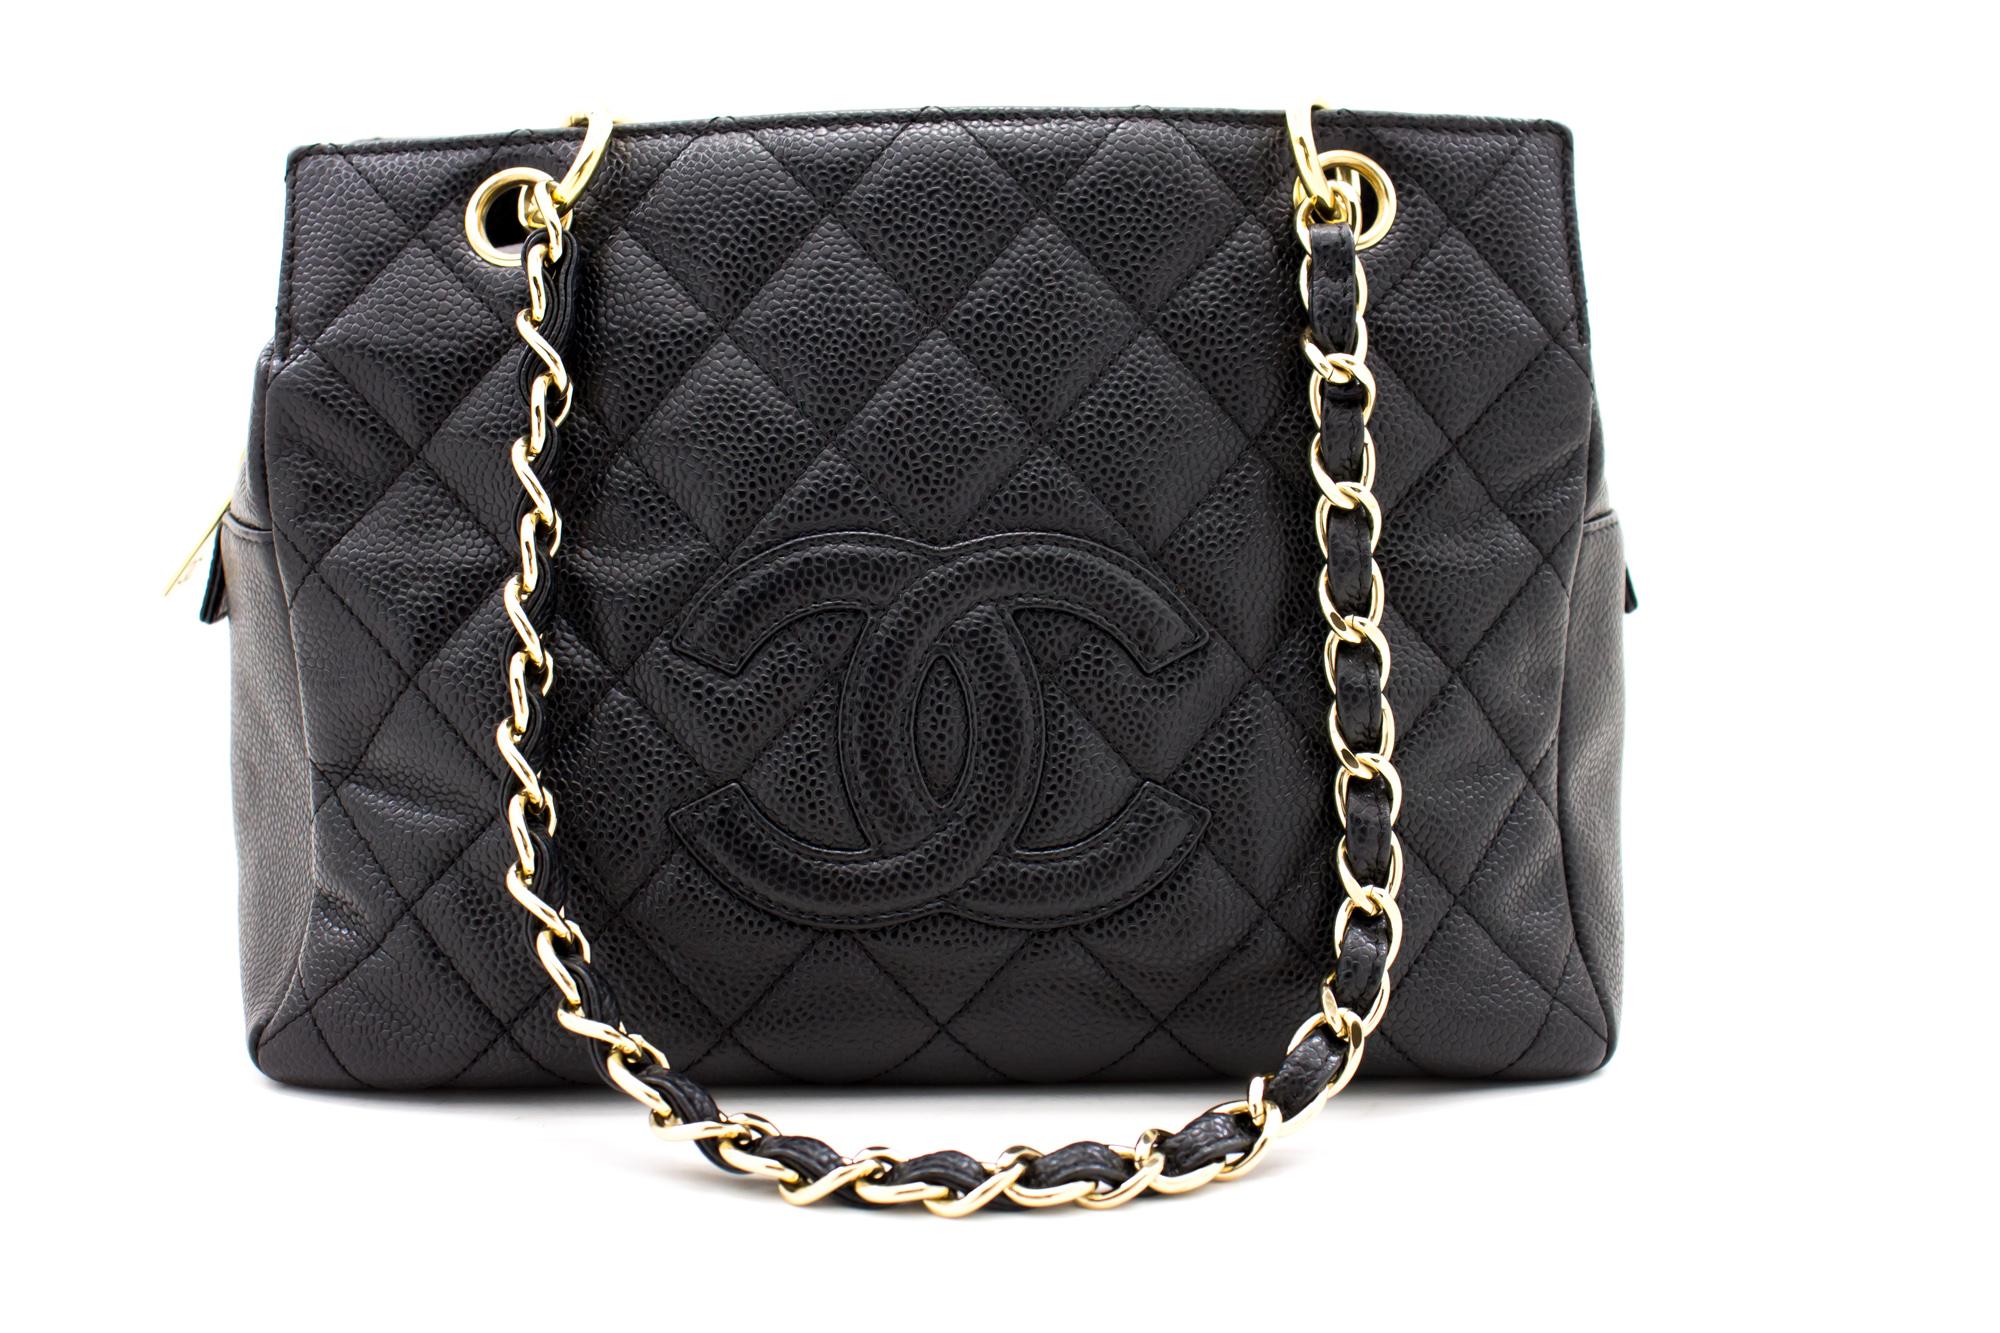 An authentic CHANEL Caviar Chain Shoulder Bag Shopping Tote Black Quilted Purse. The color is Black. The outside material is Leather. The pattern is Solid. This item is Contemporary. The year of manufacture would be 2003.
Conditions &